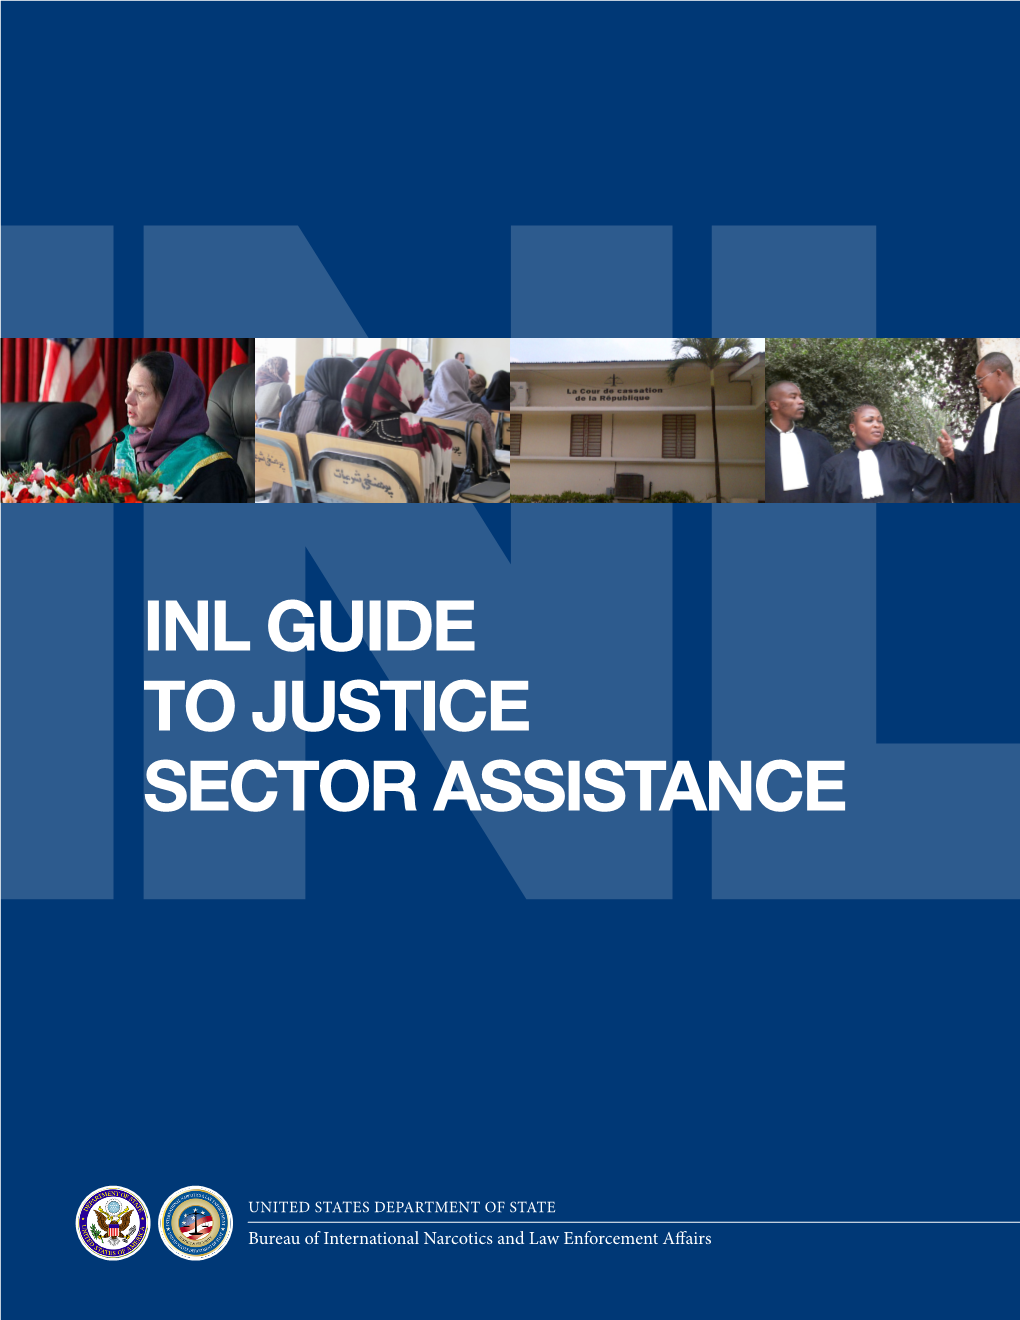 Inl Guide to Justice Sector Assistance